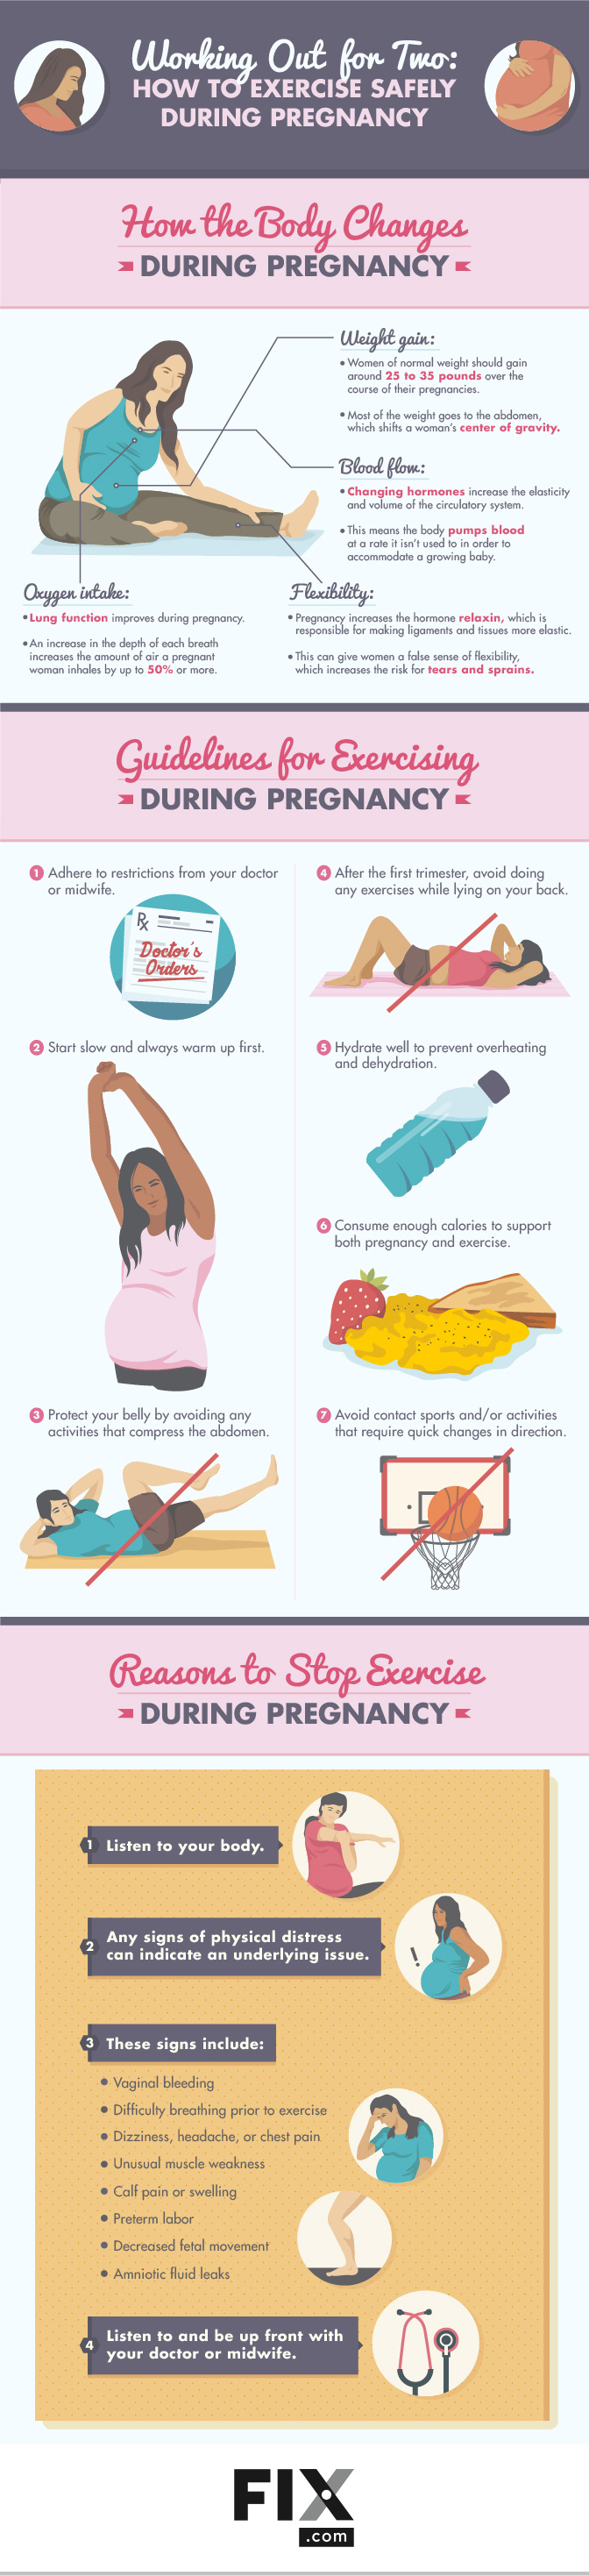 Stay Fit and Healthy During Pregnancy with This Simple Workout Plan